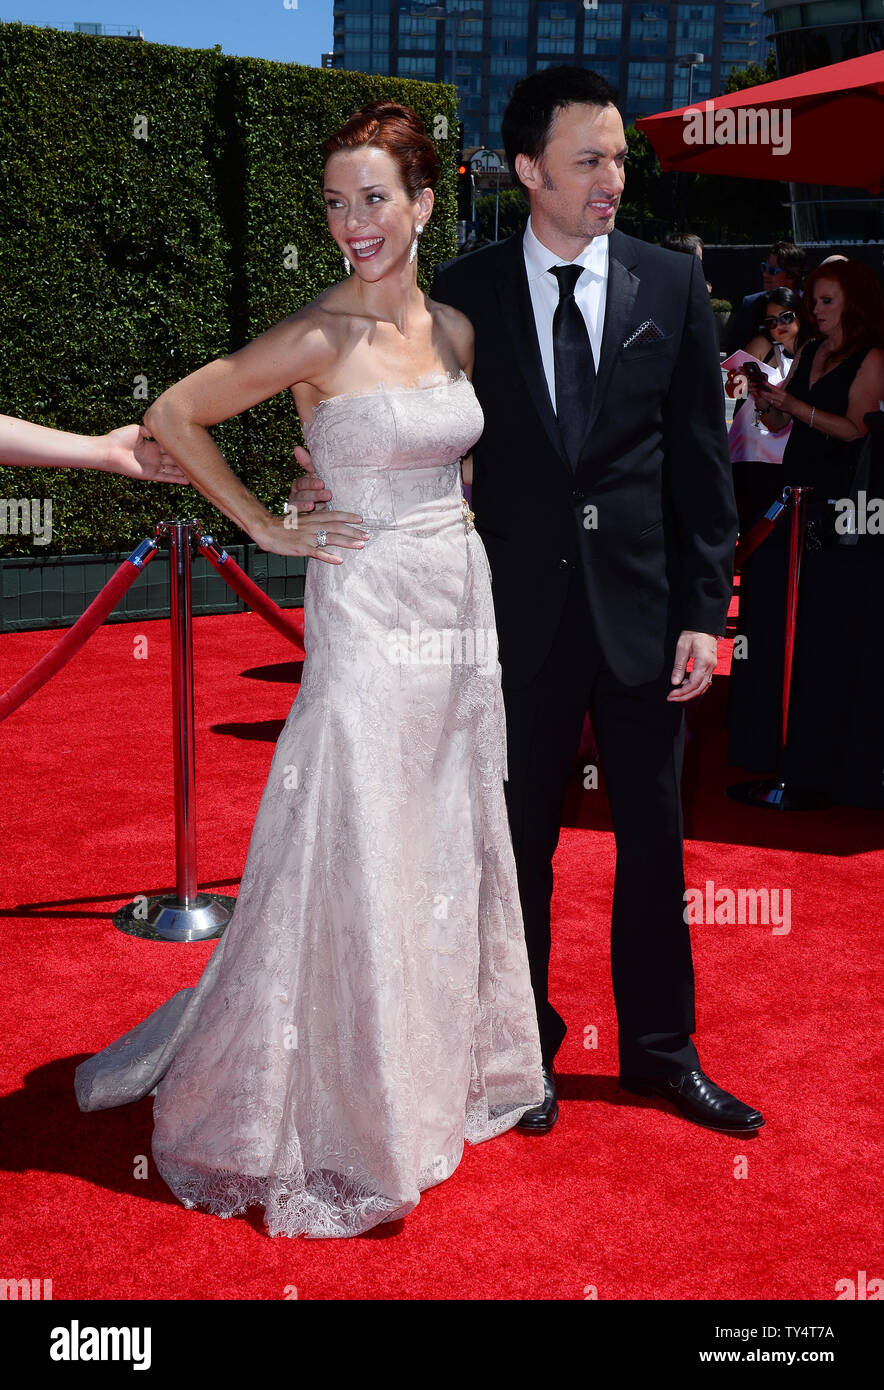 Actors Annie Wersching (L) and Stephen Full.attend the Creative Arts Emmy Awards at Nokia Theatre L.A. Live in Los Angeles on August 16, 2014. UPI/Jim Ruymen Stock Photo